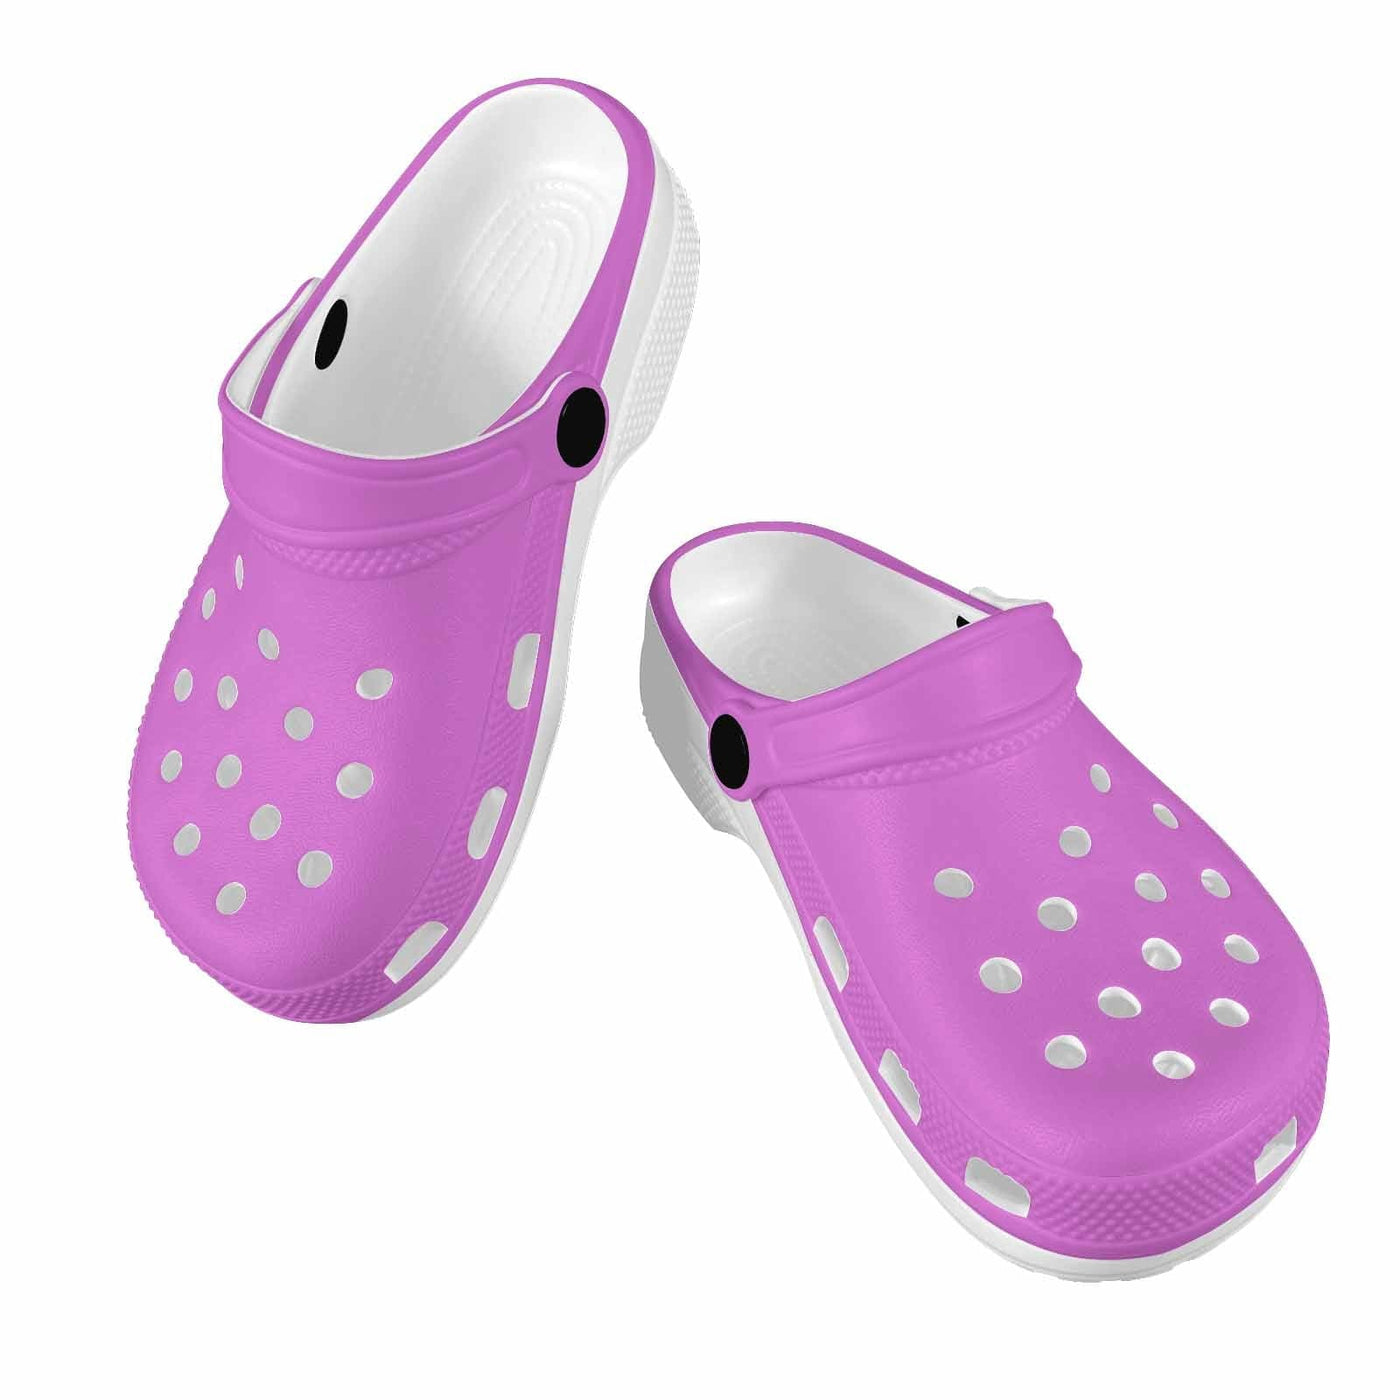 Orchid Purple Clogs For Youth - Unisex | Clogs | Youth